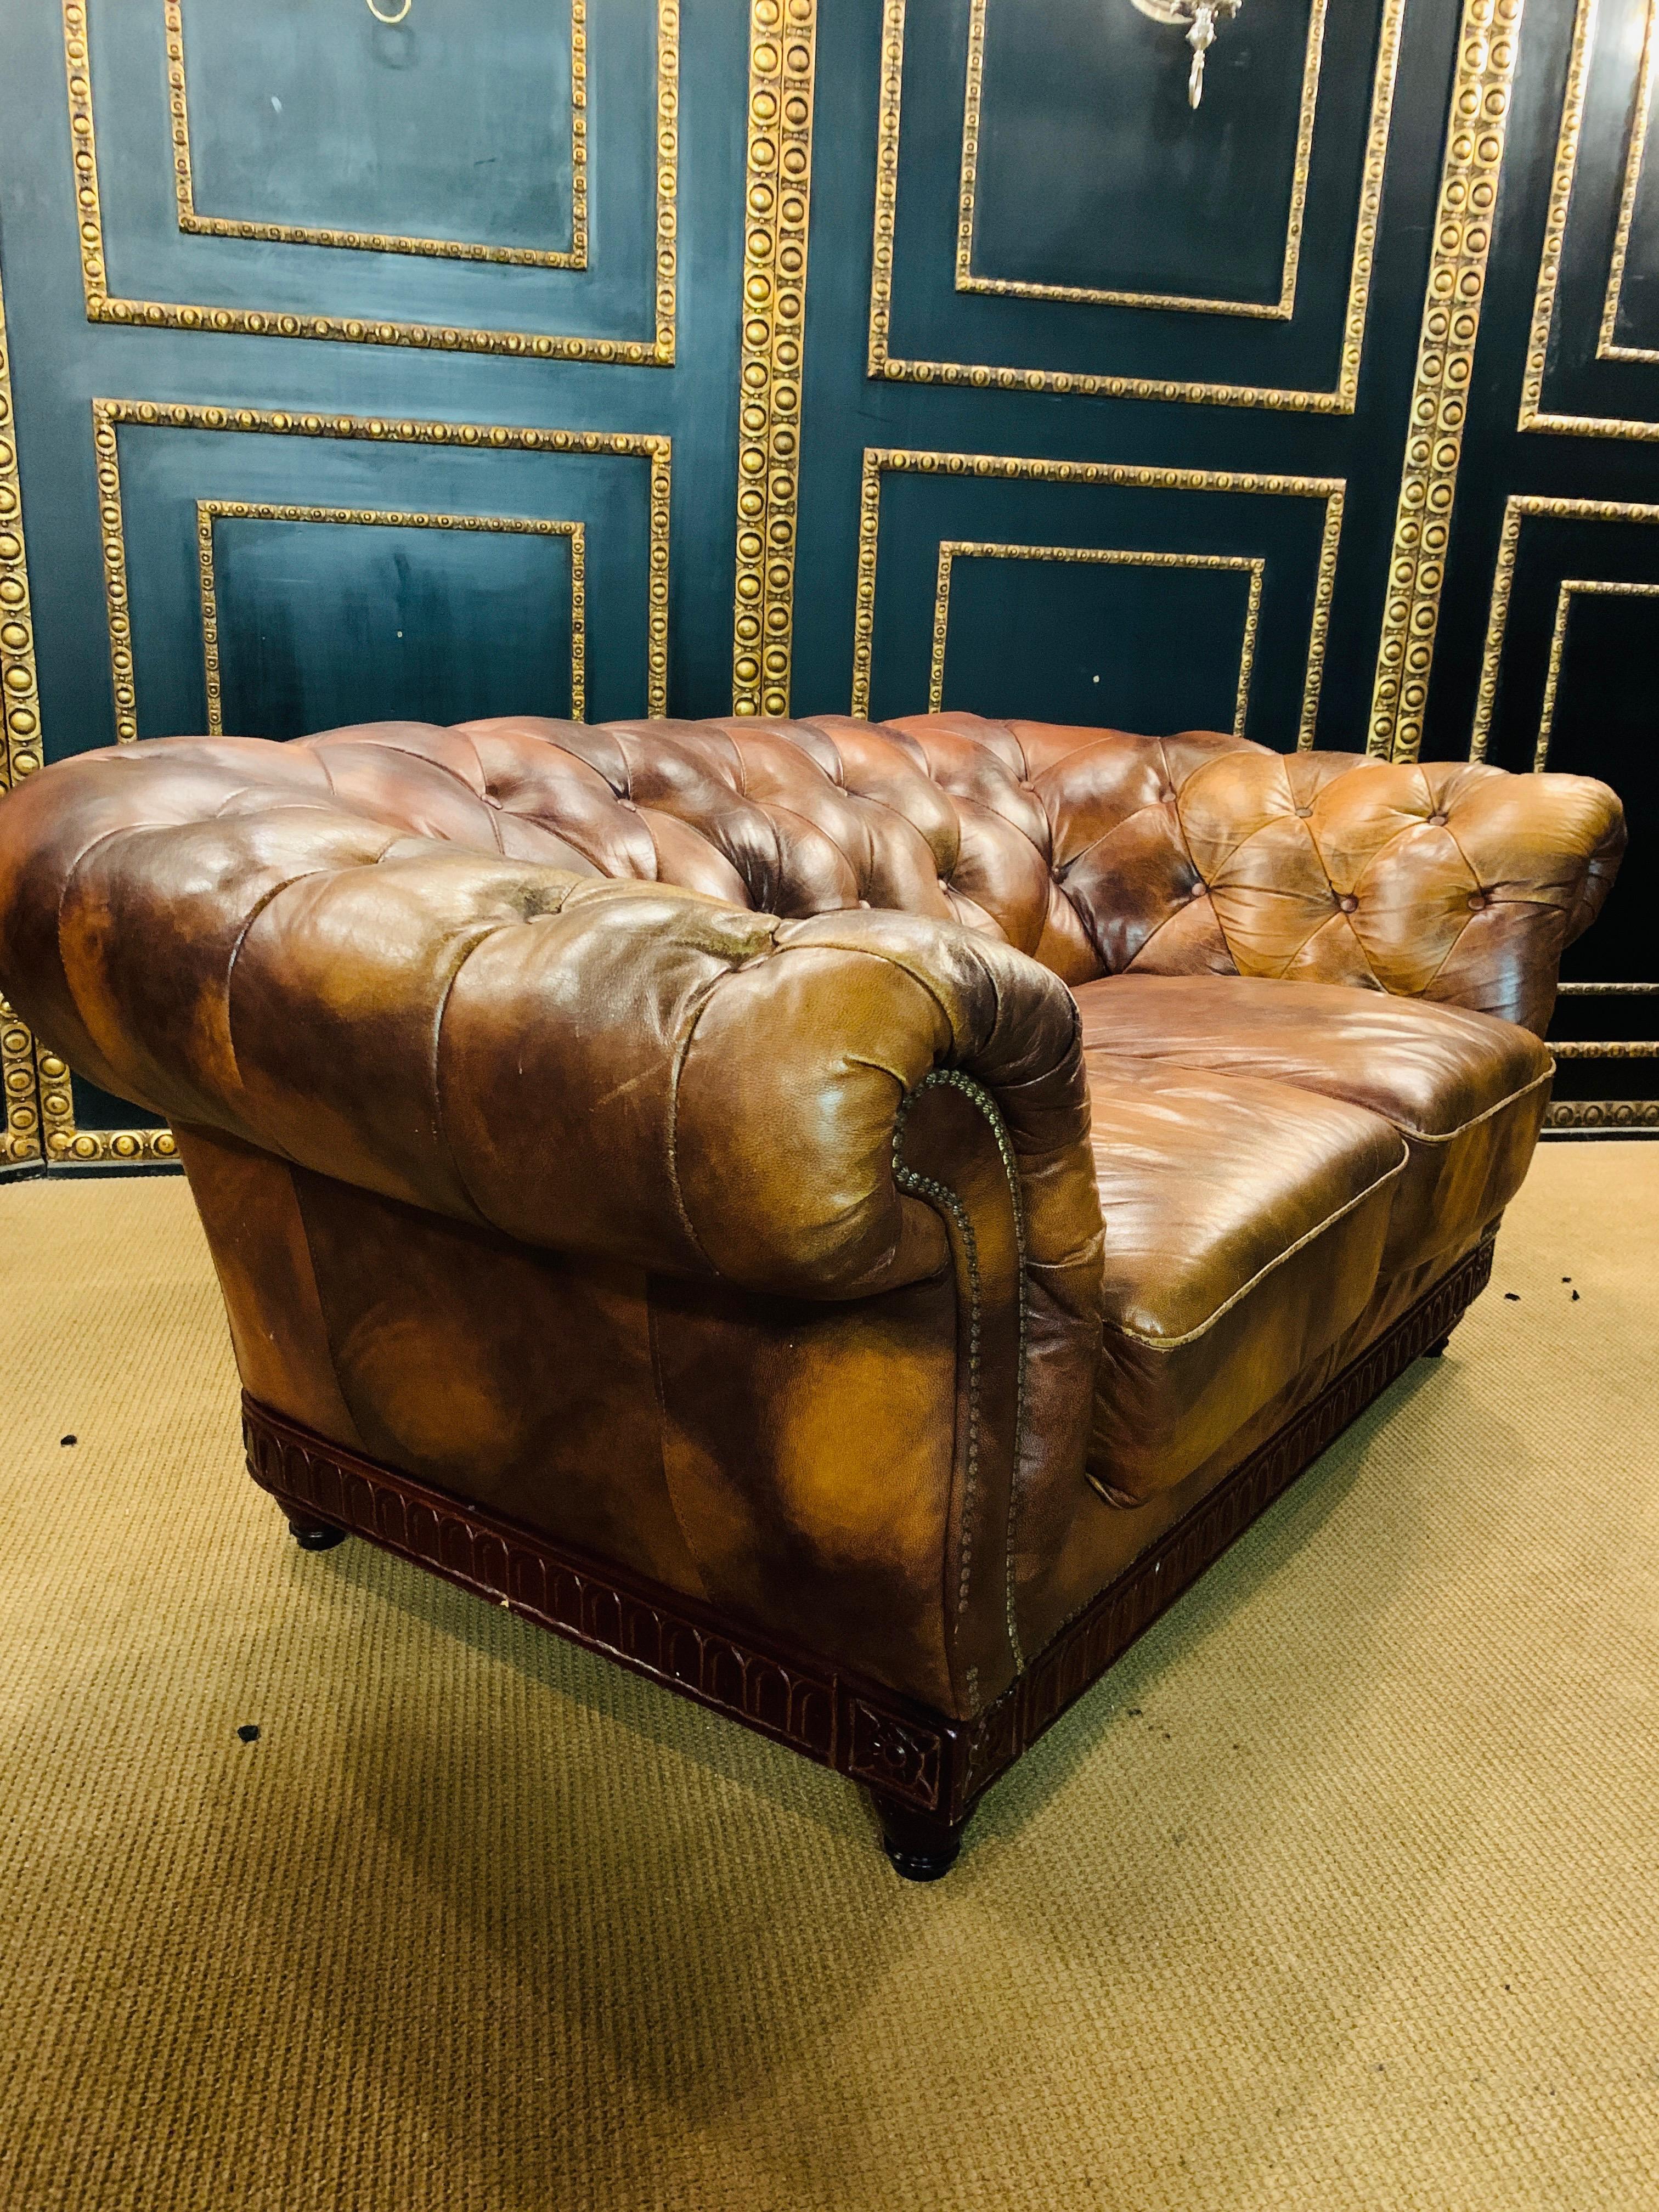 Rare and Unusual Vintage Chesterfield Sofa in Cow Pattern Leather and Wood Frame For Sale 5